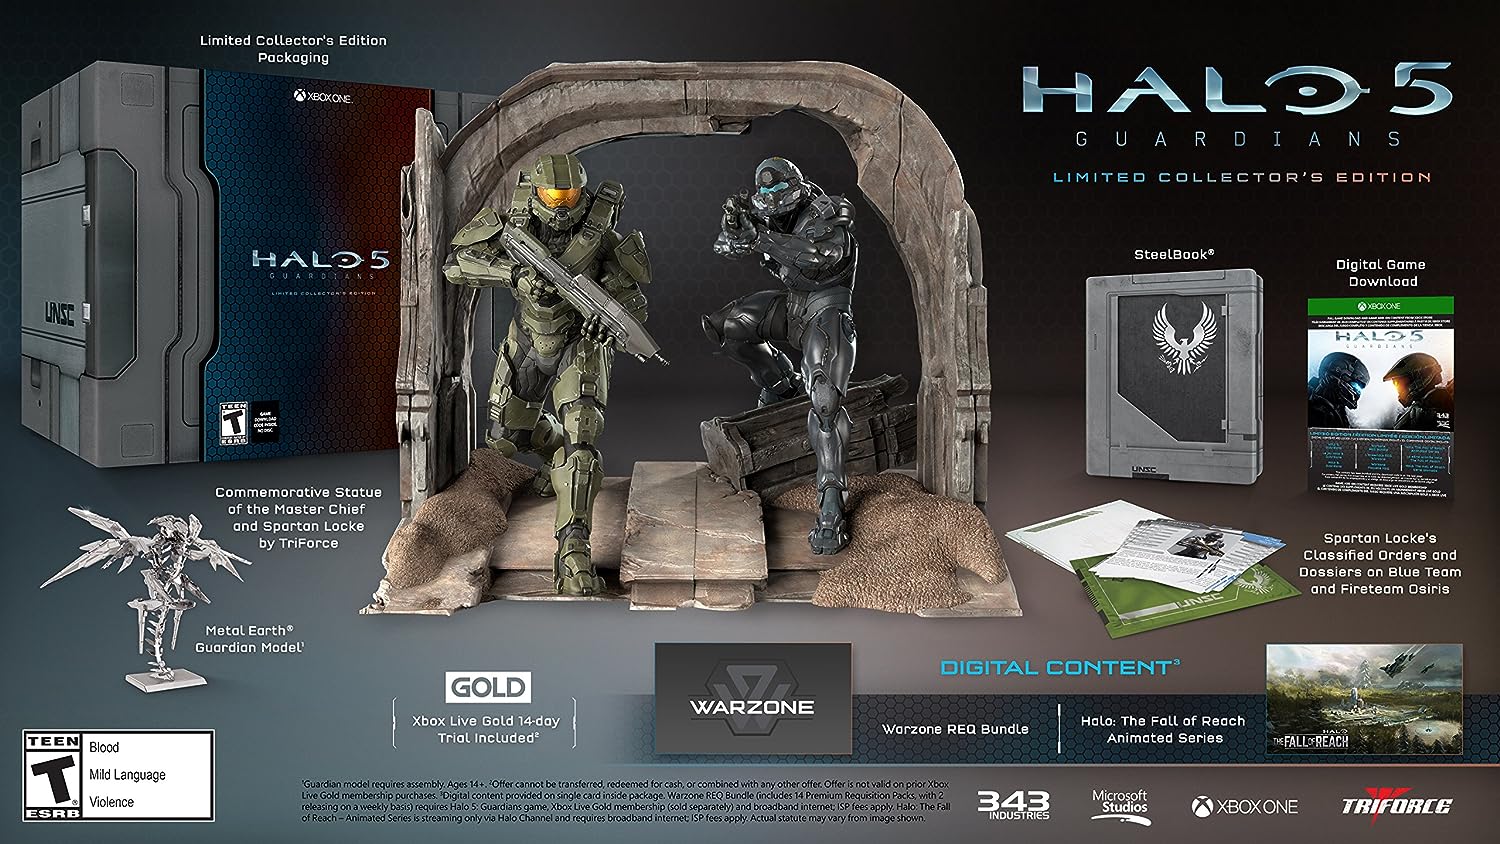 Halo 5: Guardians Limited Edition Collector's Edition – Xbox One [No Disc Included] - $200